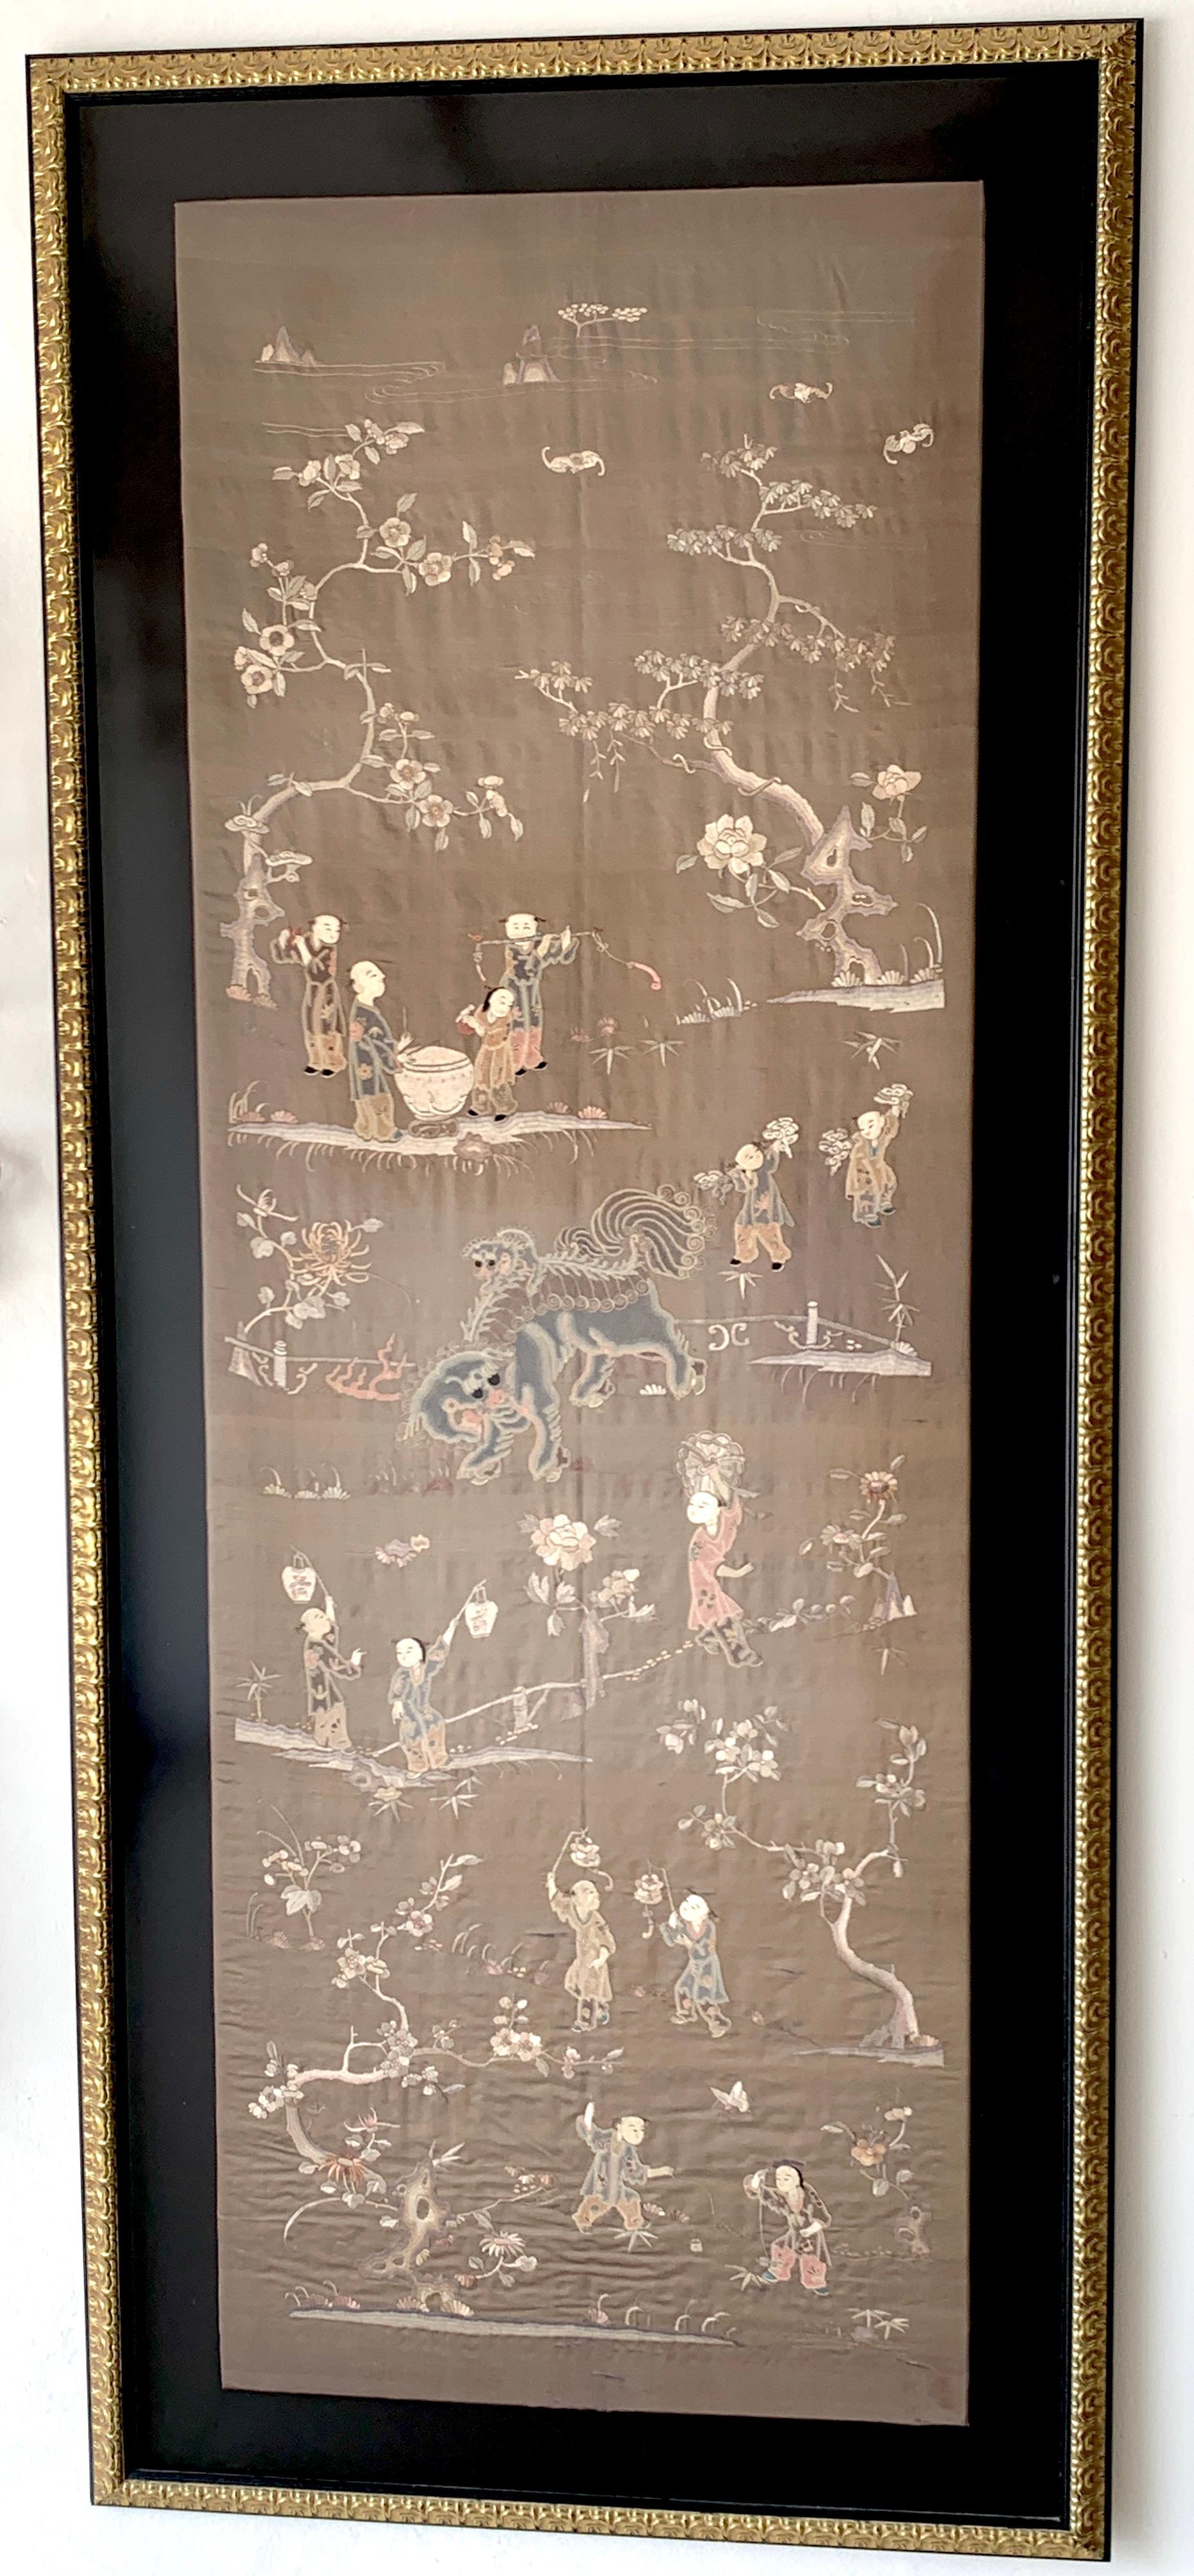 Exquisite Chinese Export landscape silk embroidery, of large size with numerous landscape vignettes with a central Foo Dog, in beautiful earth-tone palette. In a matted later frame with plexiglass front. 
The Embroidery measures 26-Inches wide x